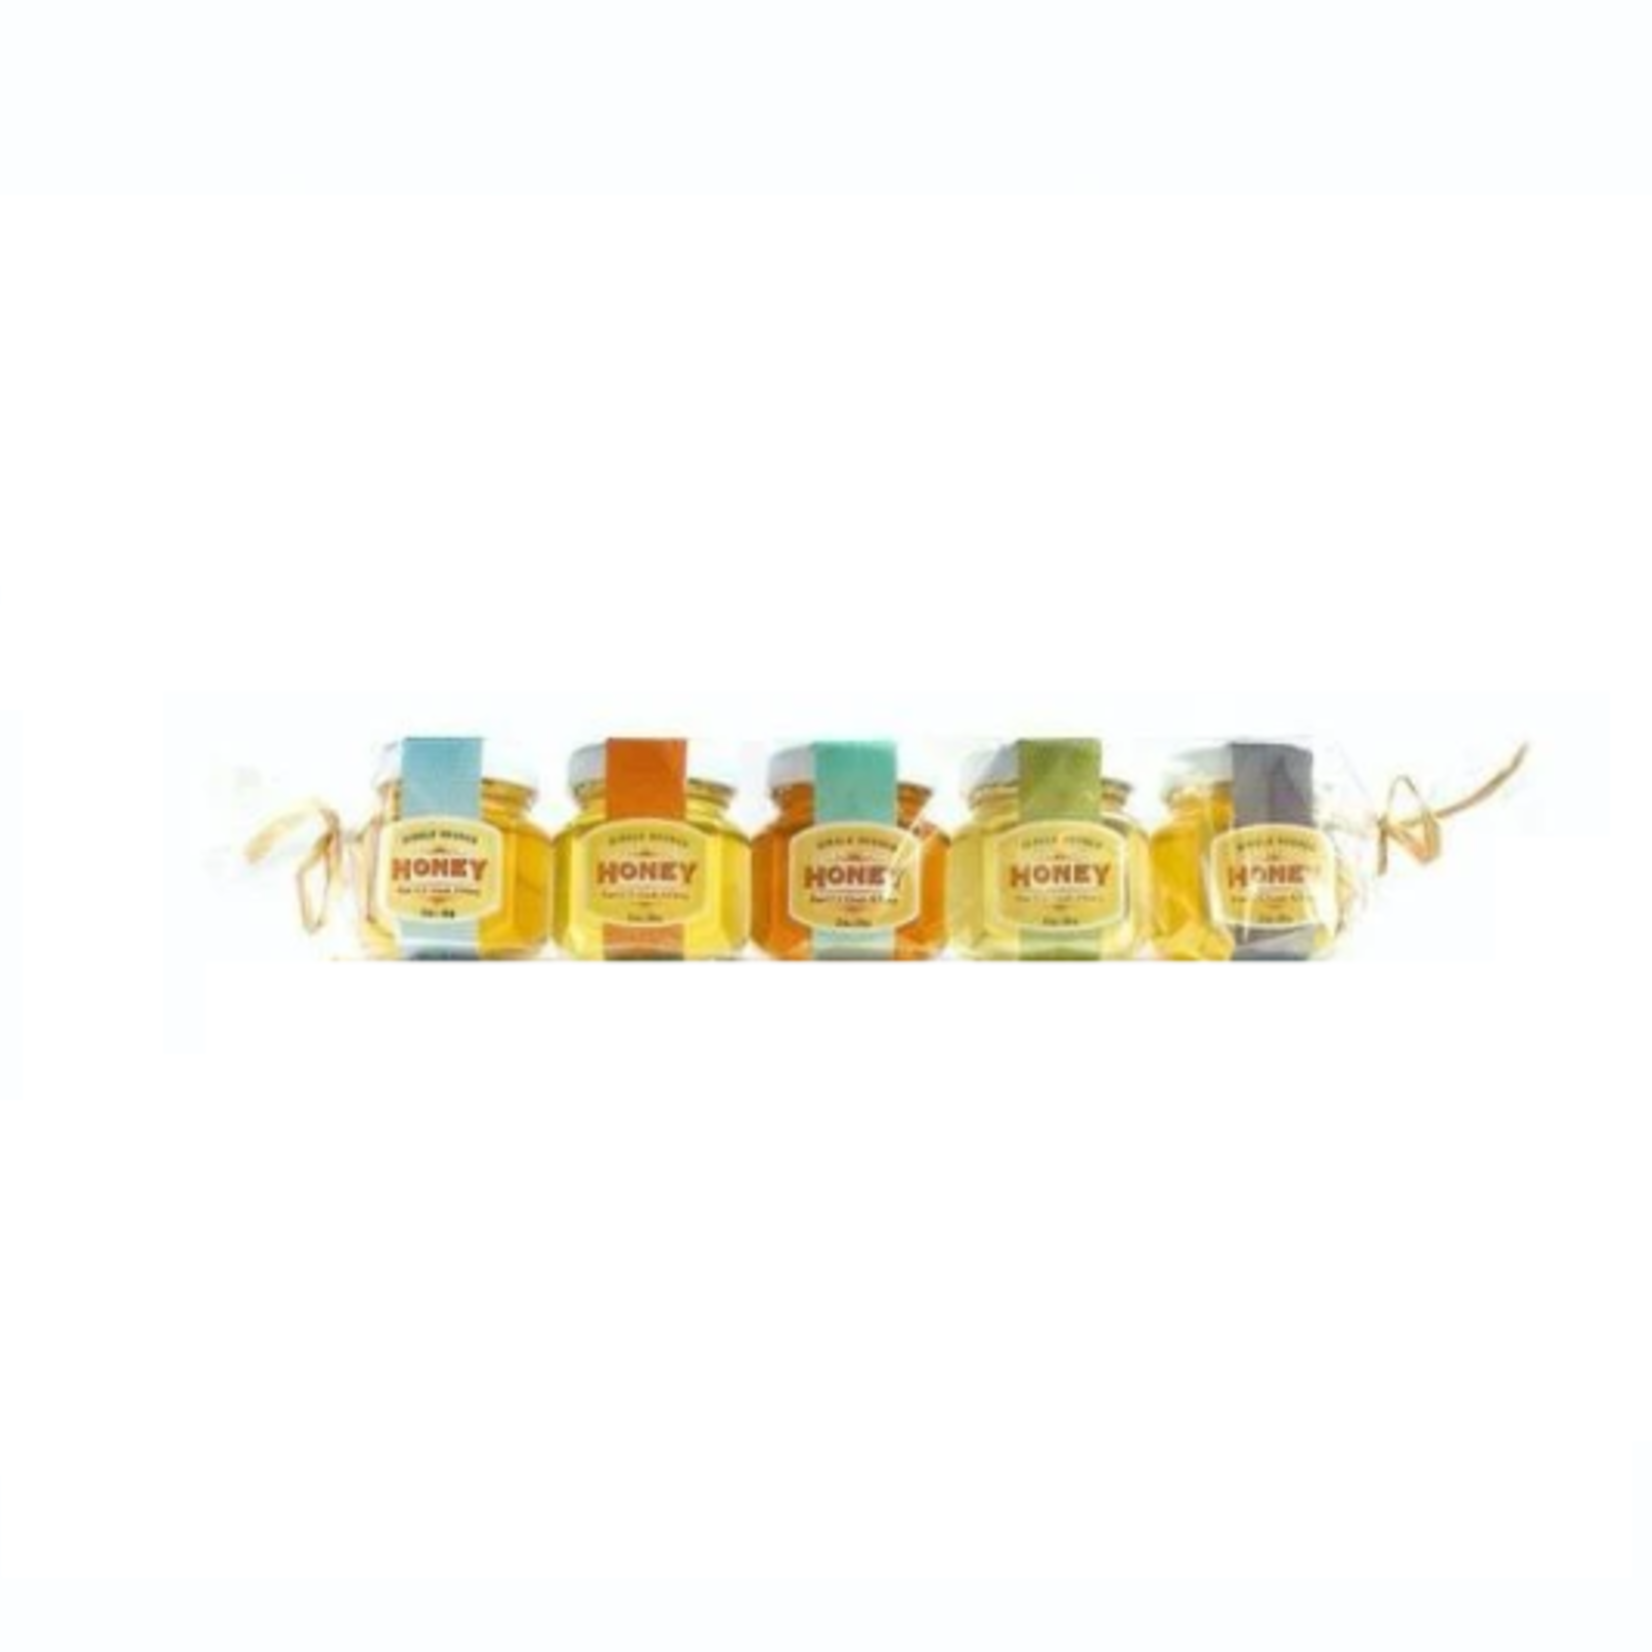 Great Ciao Ames Farm Honey, Gift Pack, Watertown, MN 5x2oz